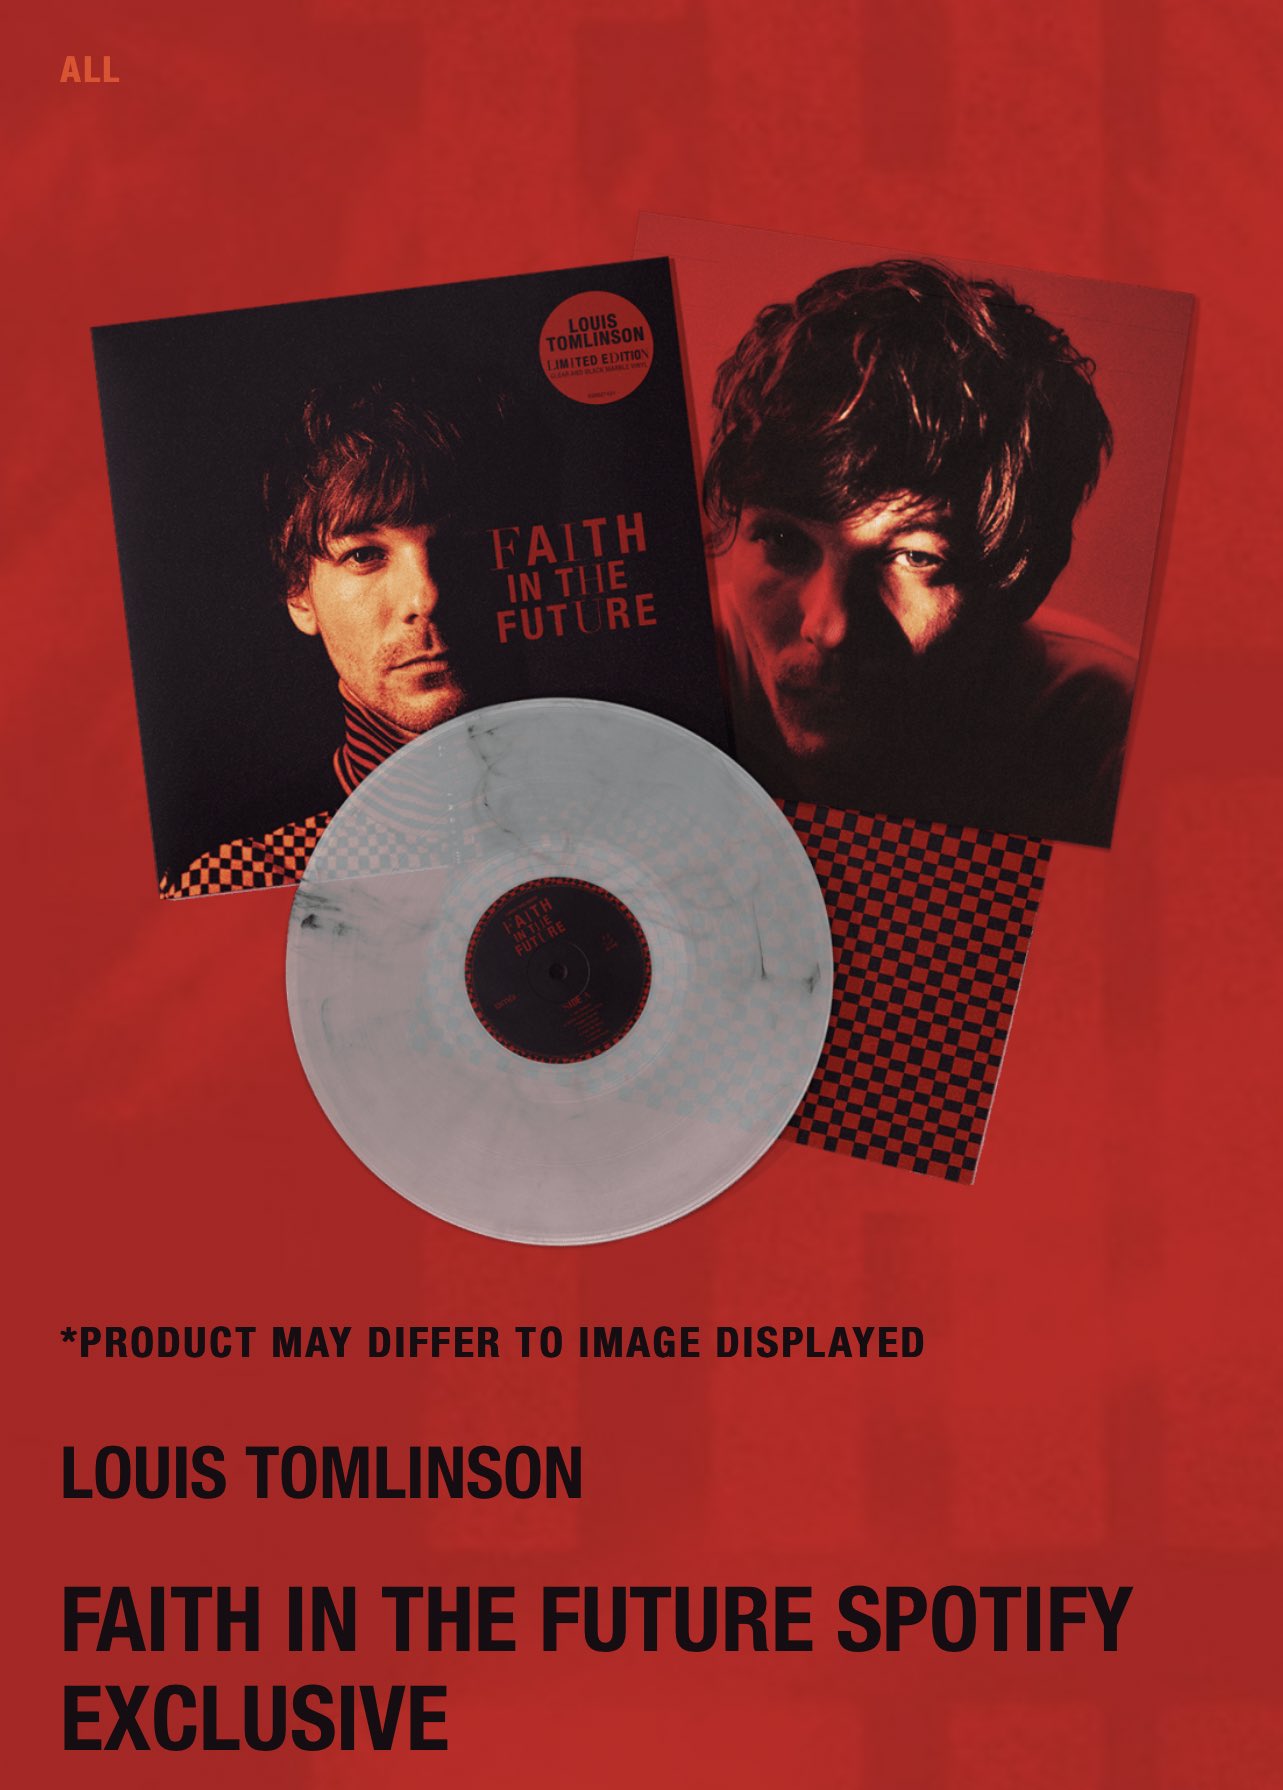 Louis Tomlinson - Faith in the Future (LP) Limited Edition Picture